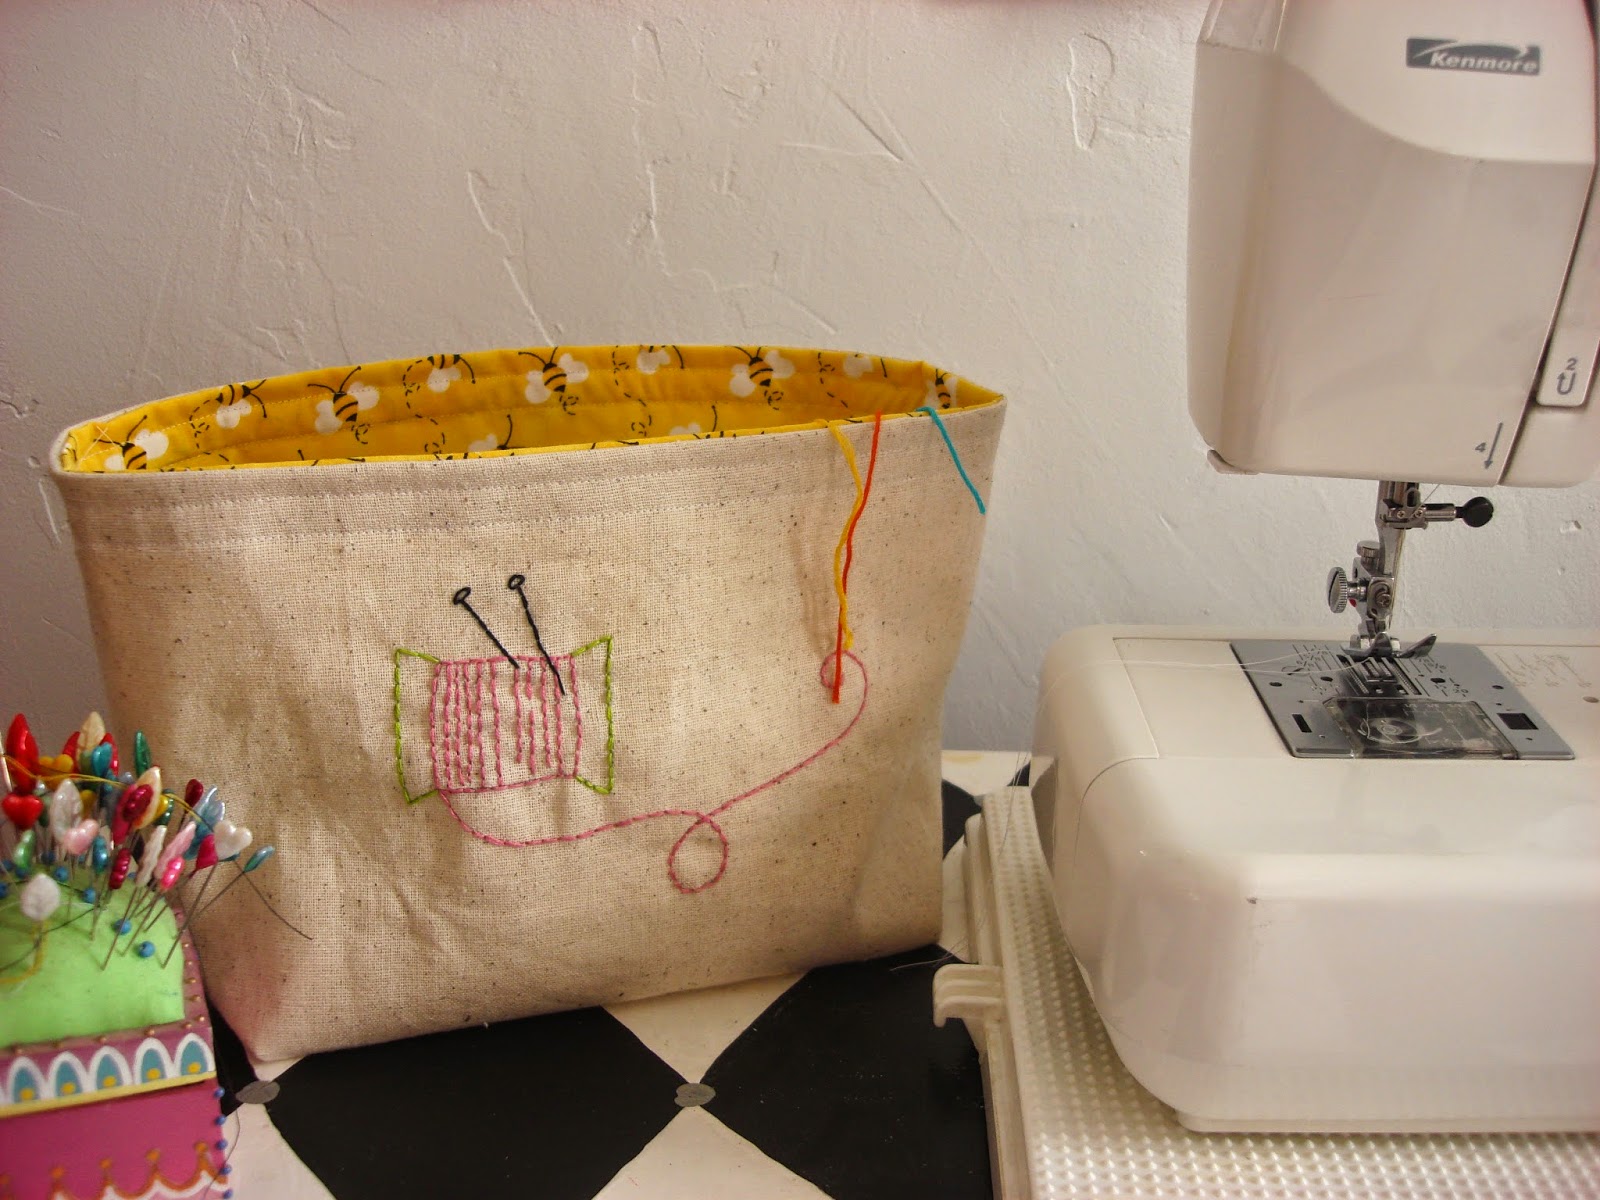 DIYU: How to Thread Your Sewing Machine